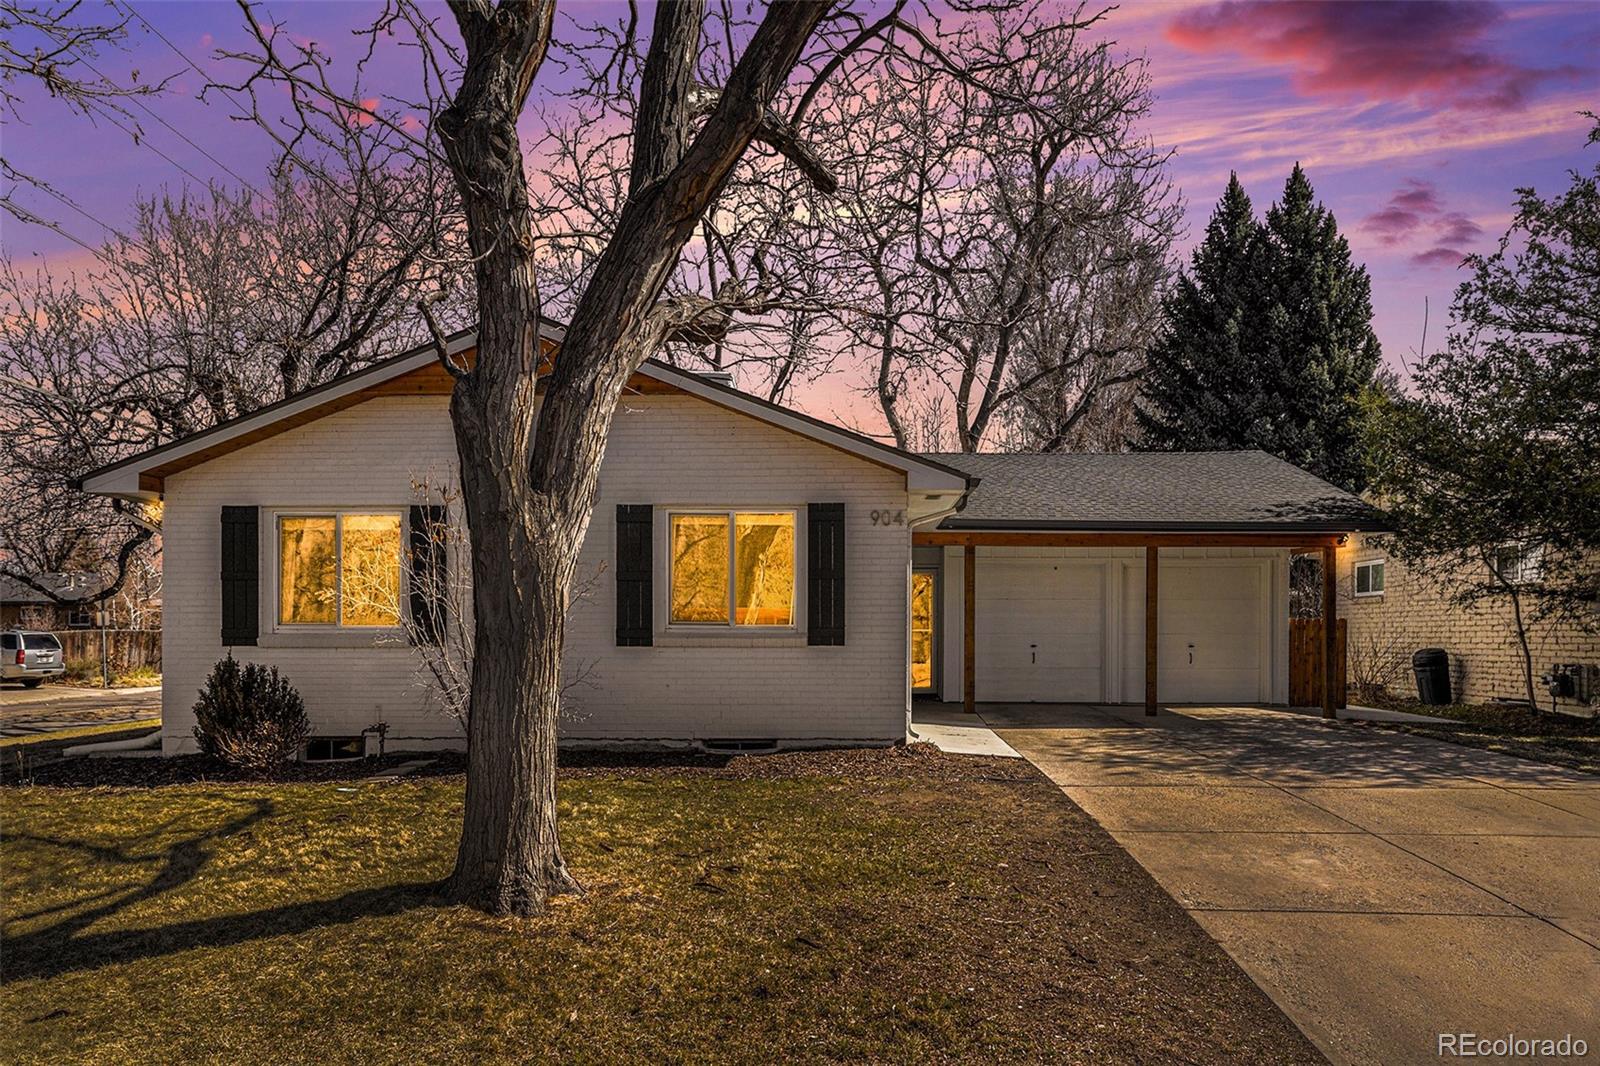 904 s ivy street, denver sold home. Closed on 2024-04-19 for $780,000.